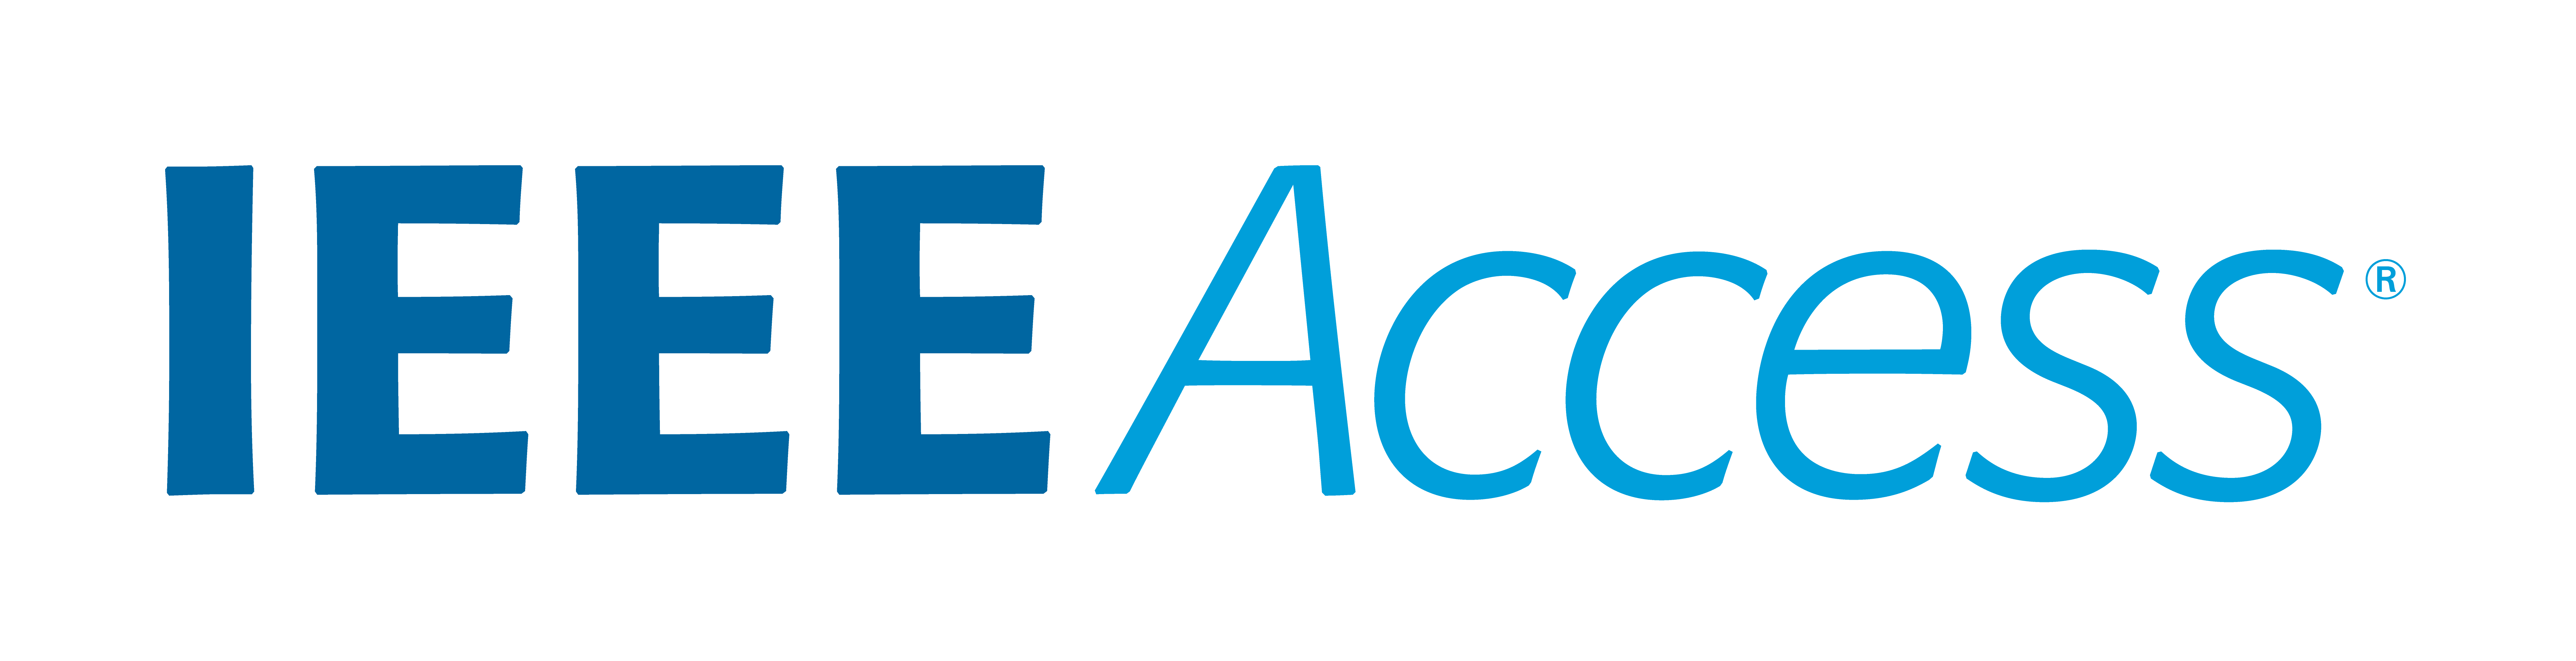 Access Logo - Learn More About IEEE Access - IEEE AccessIEEE Access